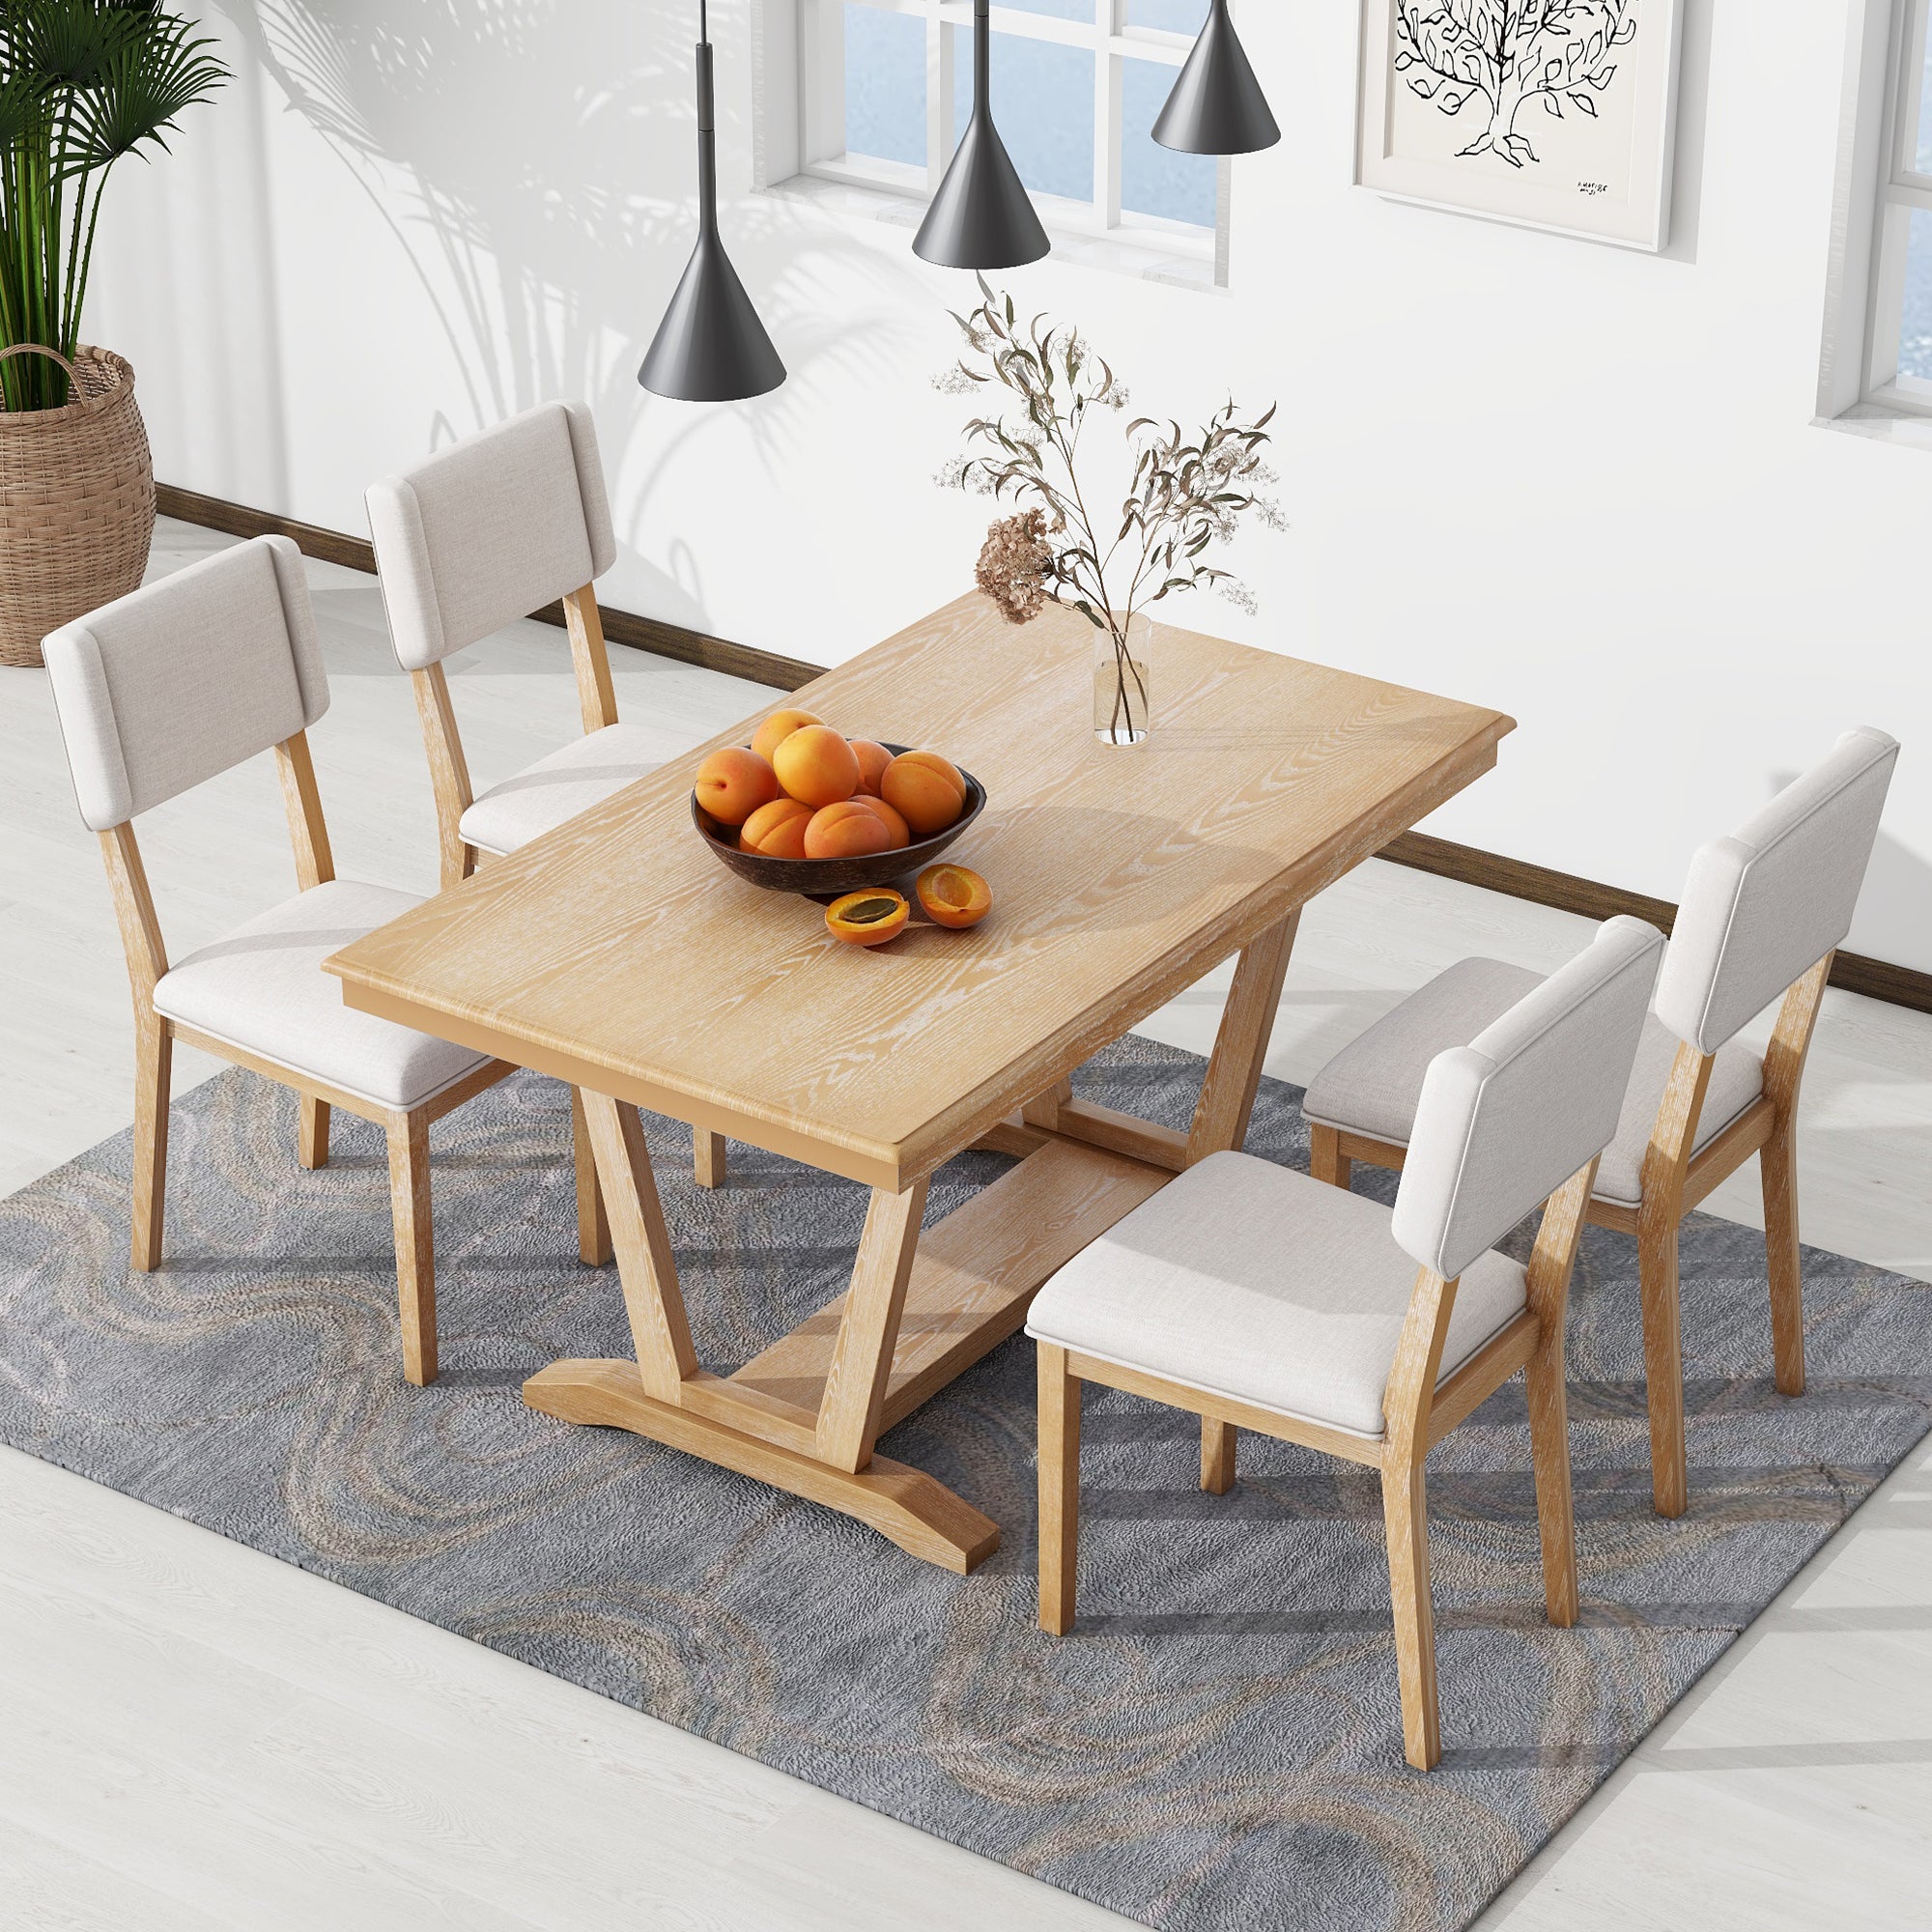 Bellemave 59" Rustic 5-piece Dining Table Set with 4 Upholstered Chairs